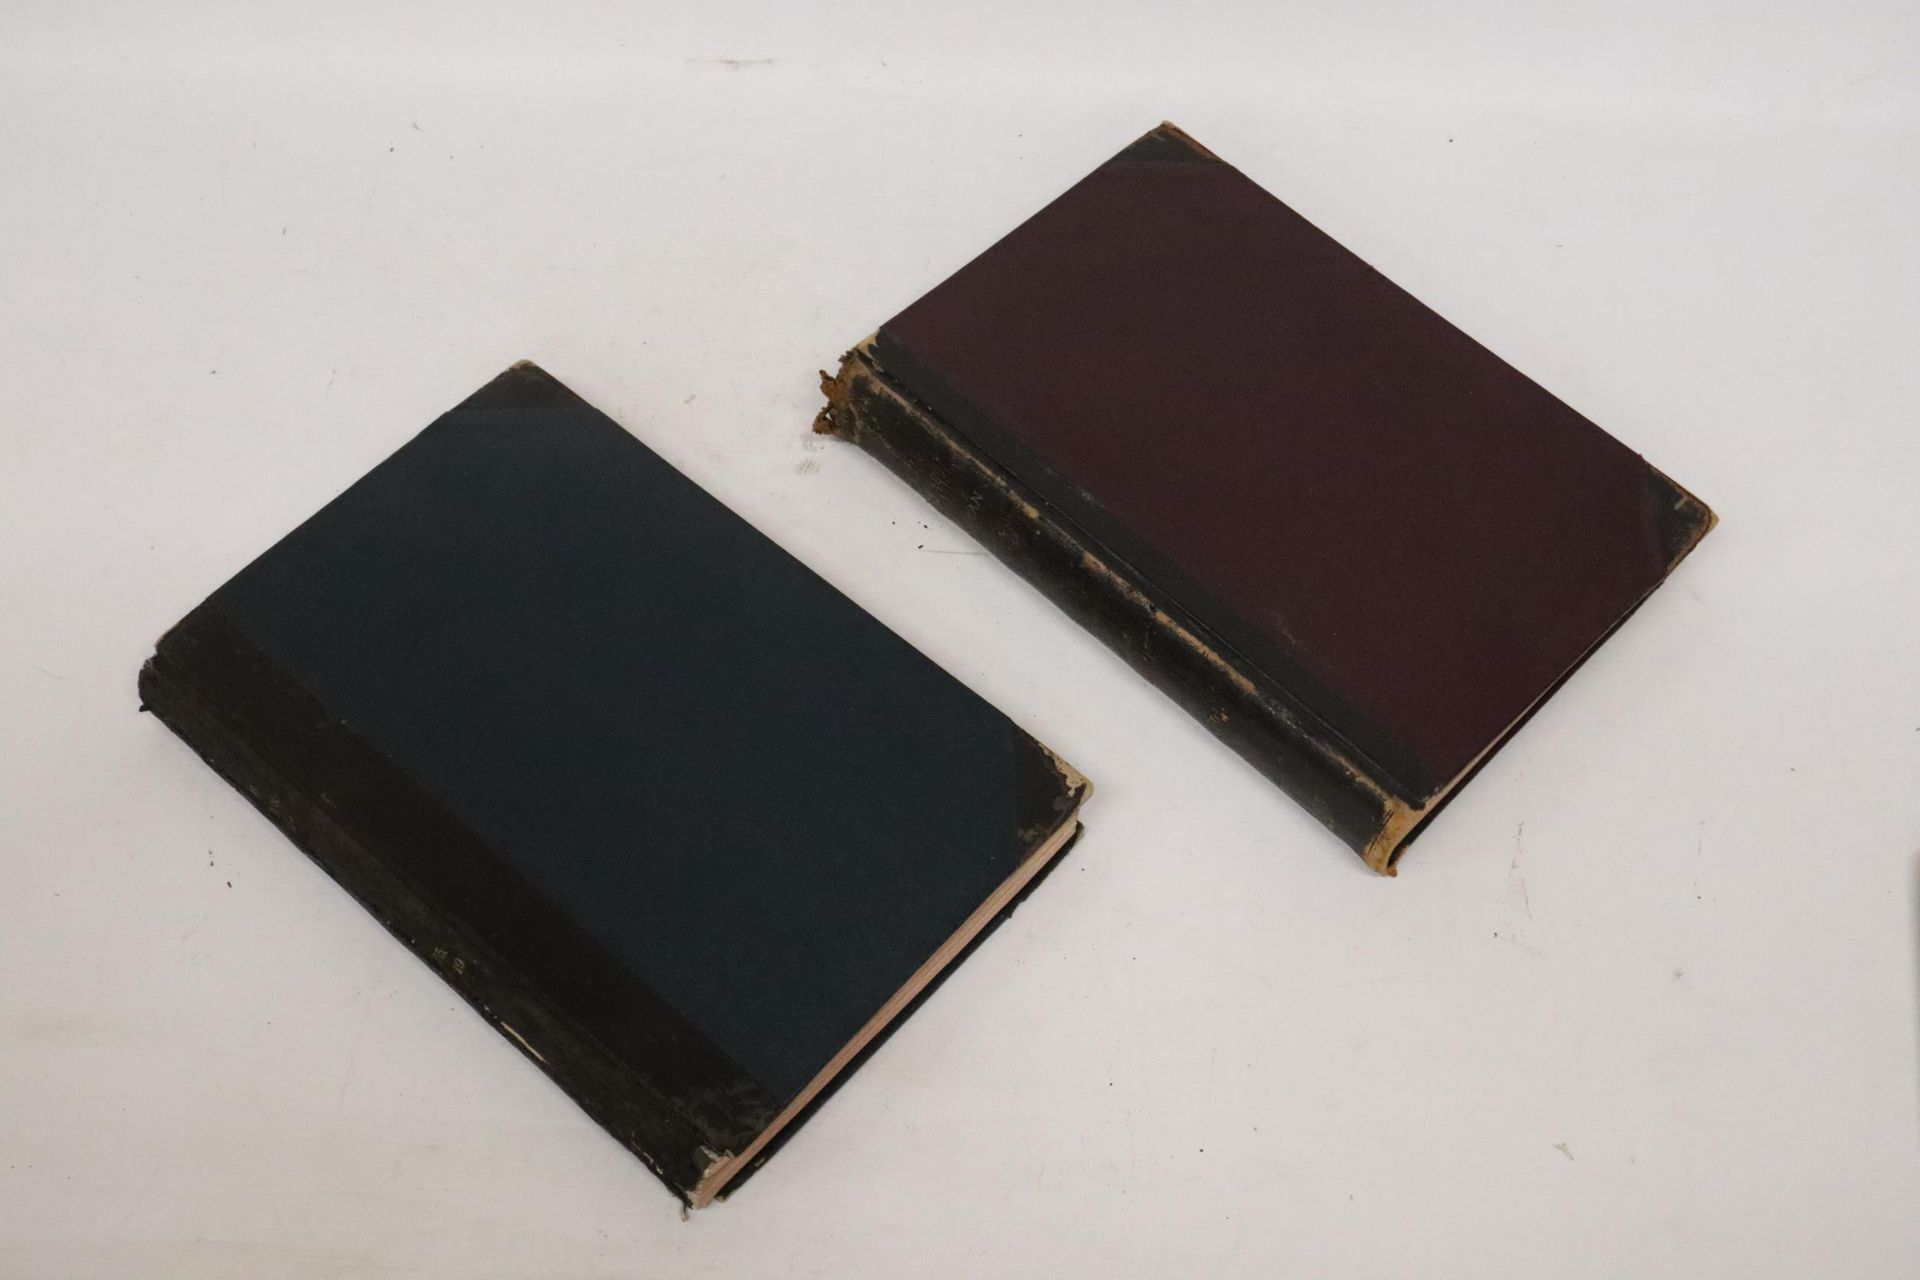 TWO LARGE VOLUMES OF "THE BOOKMAN" 1913-1914 AND 1918-1919